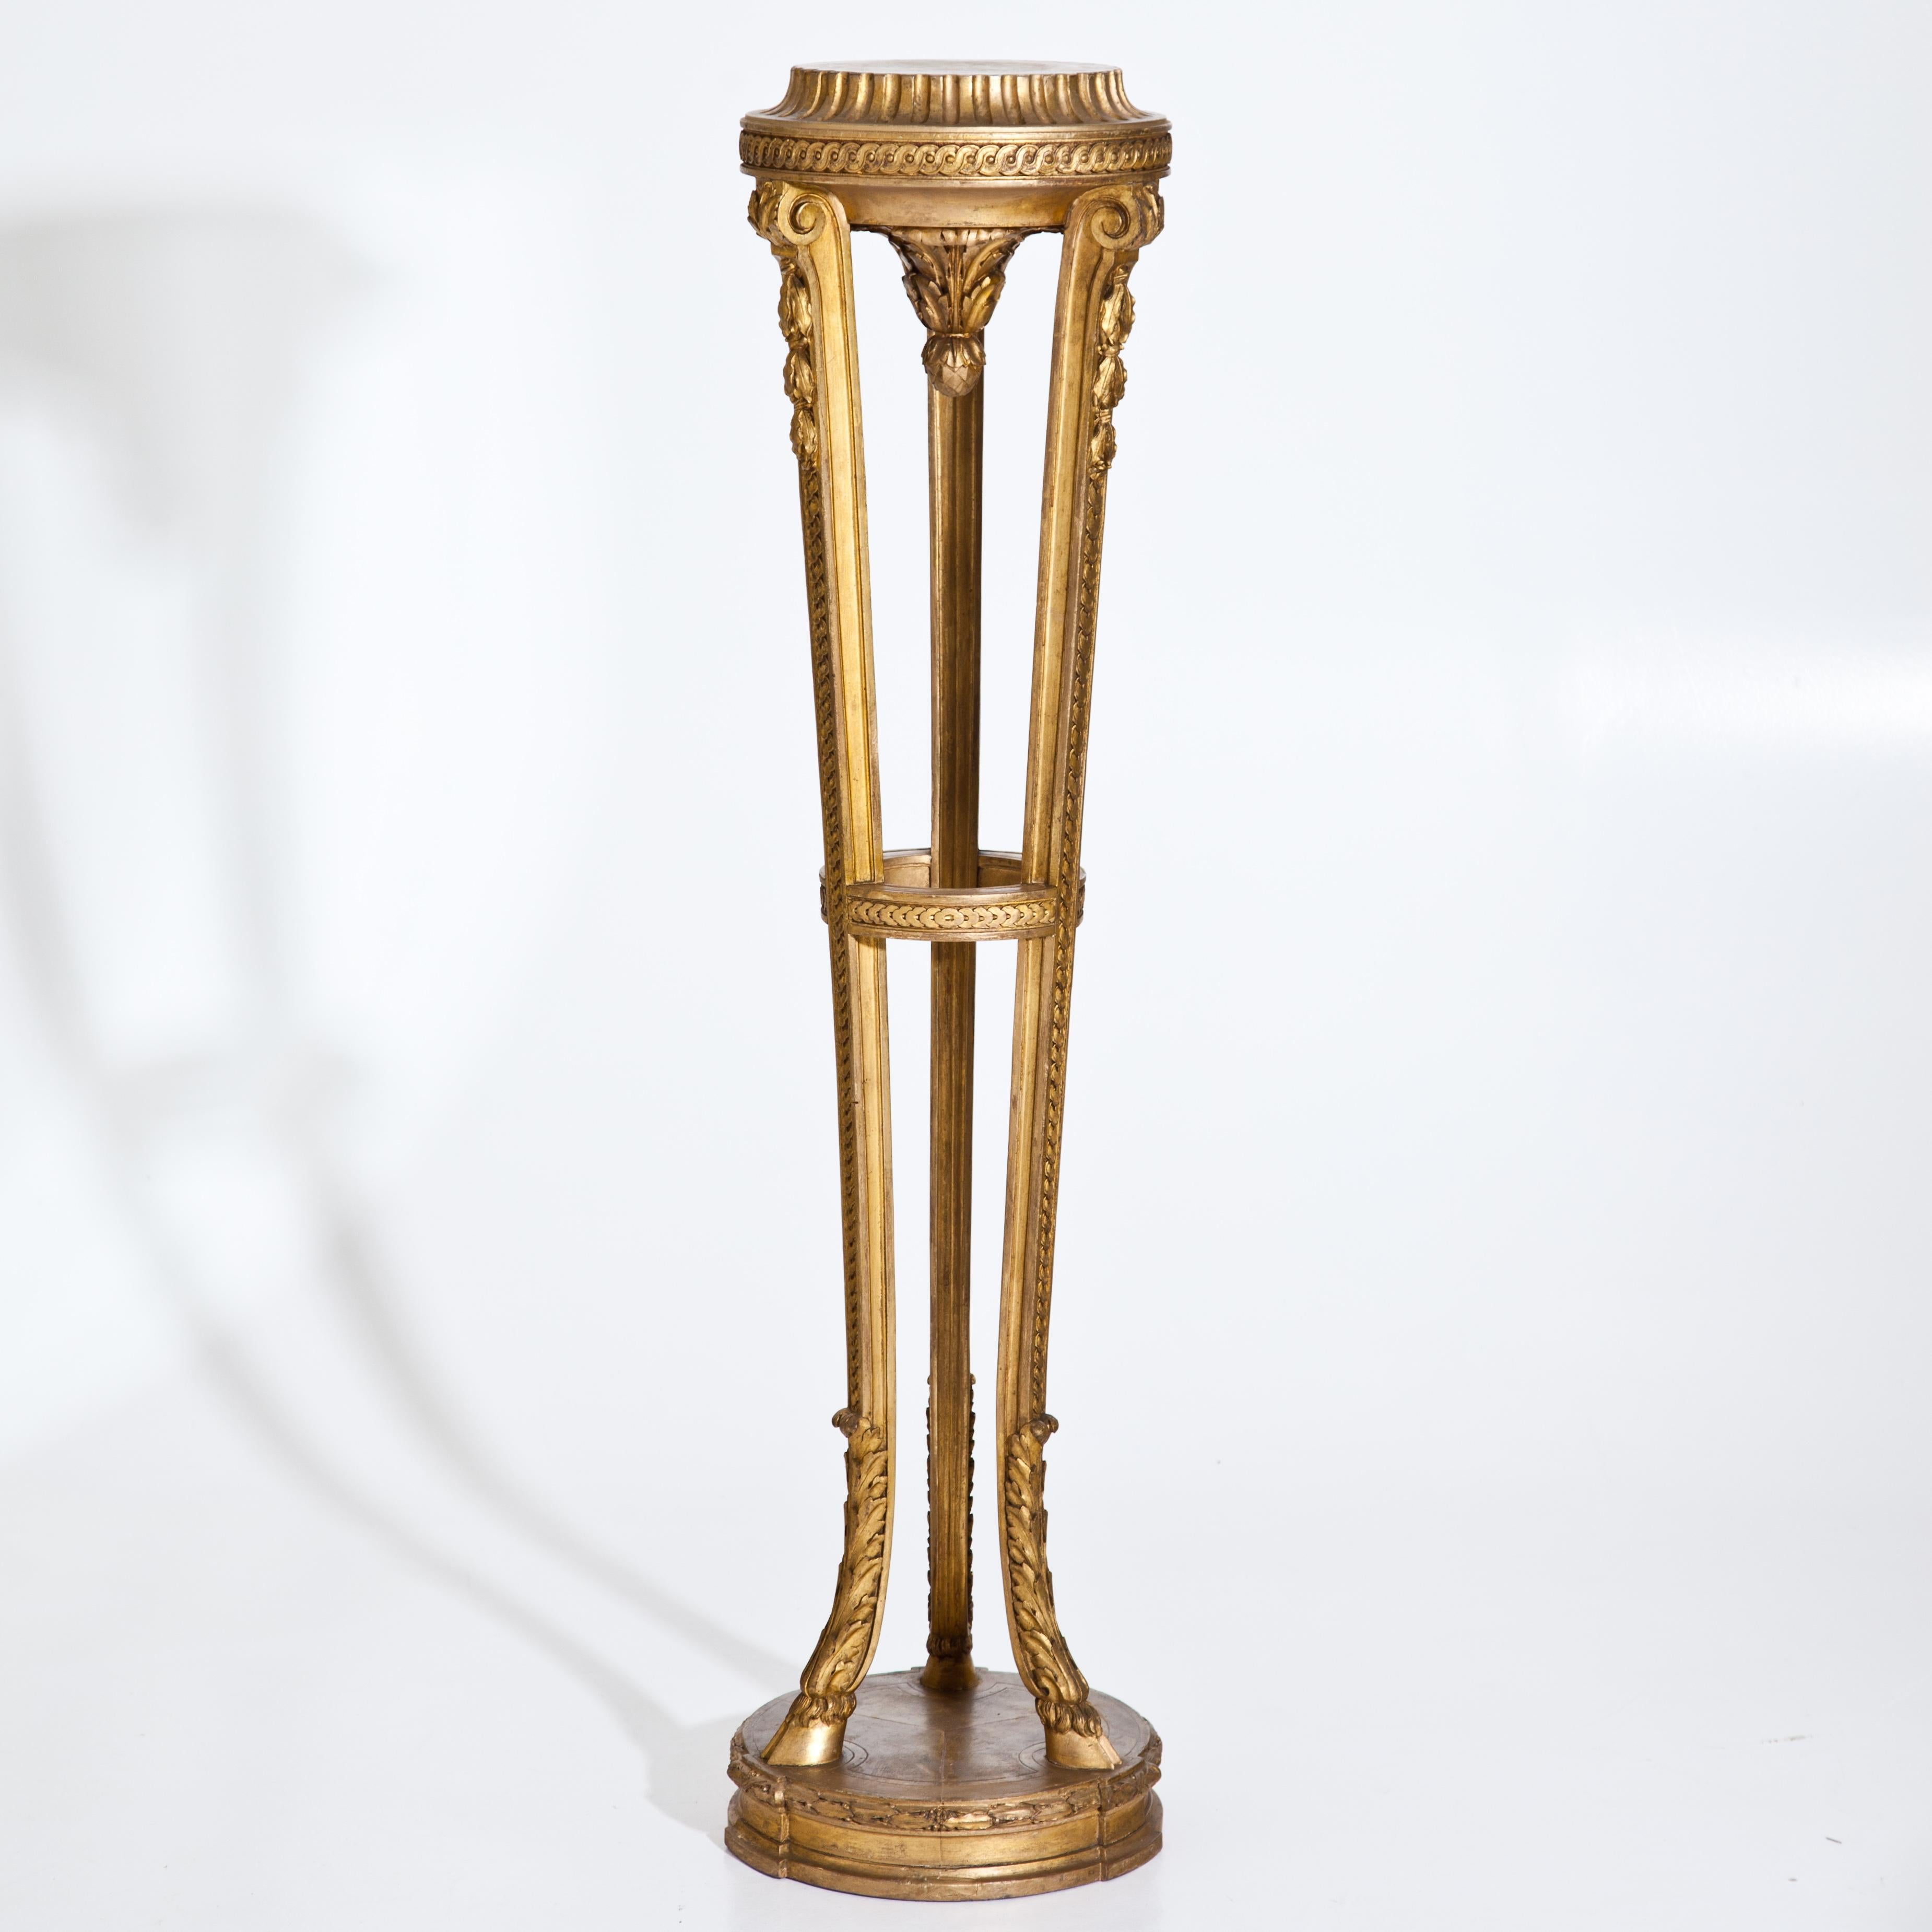 Gold patinated column on a round base in the style of Louis Seize. The three legs are decorated with goat's feet with acanthus leaves and woven decorations in relief. The round shelf with further woven band and fluted fillet. The pendant in cone